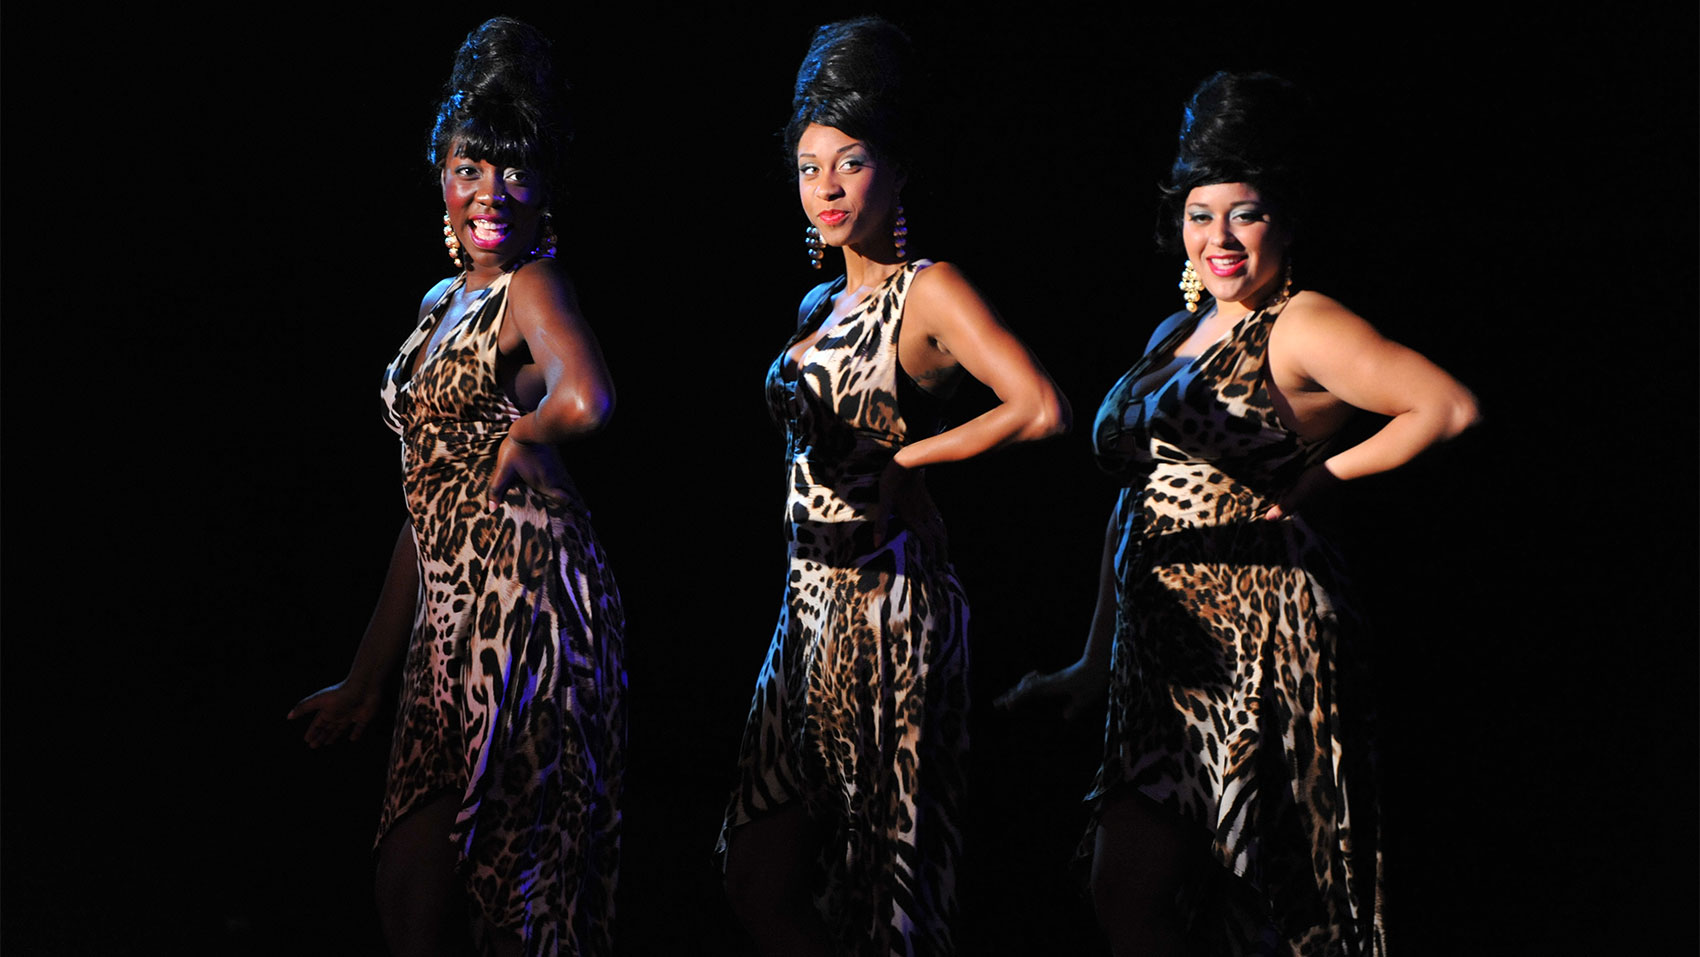 Three women with animal print dresses and beehive hairstyles standing together, each with a hand on their hips